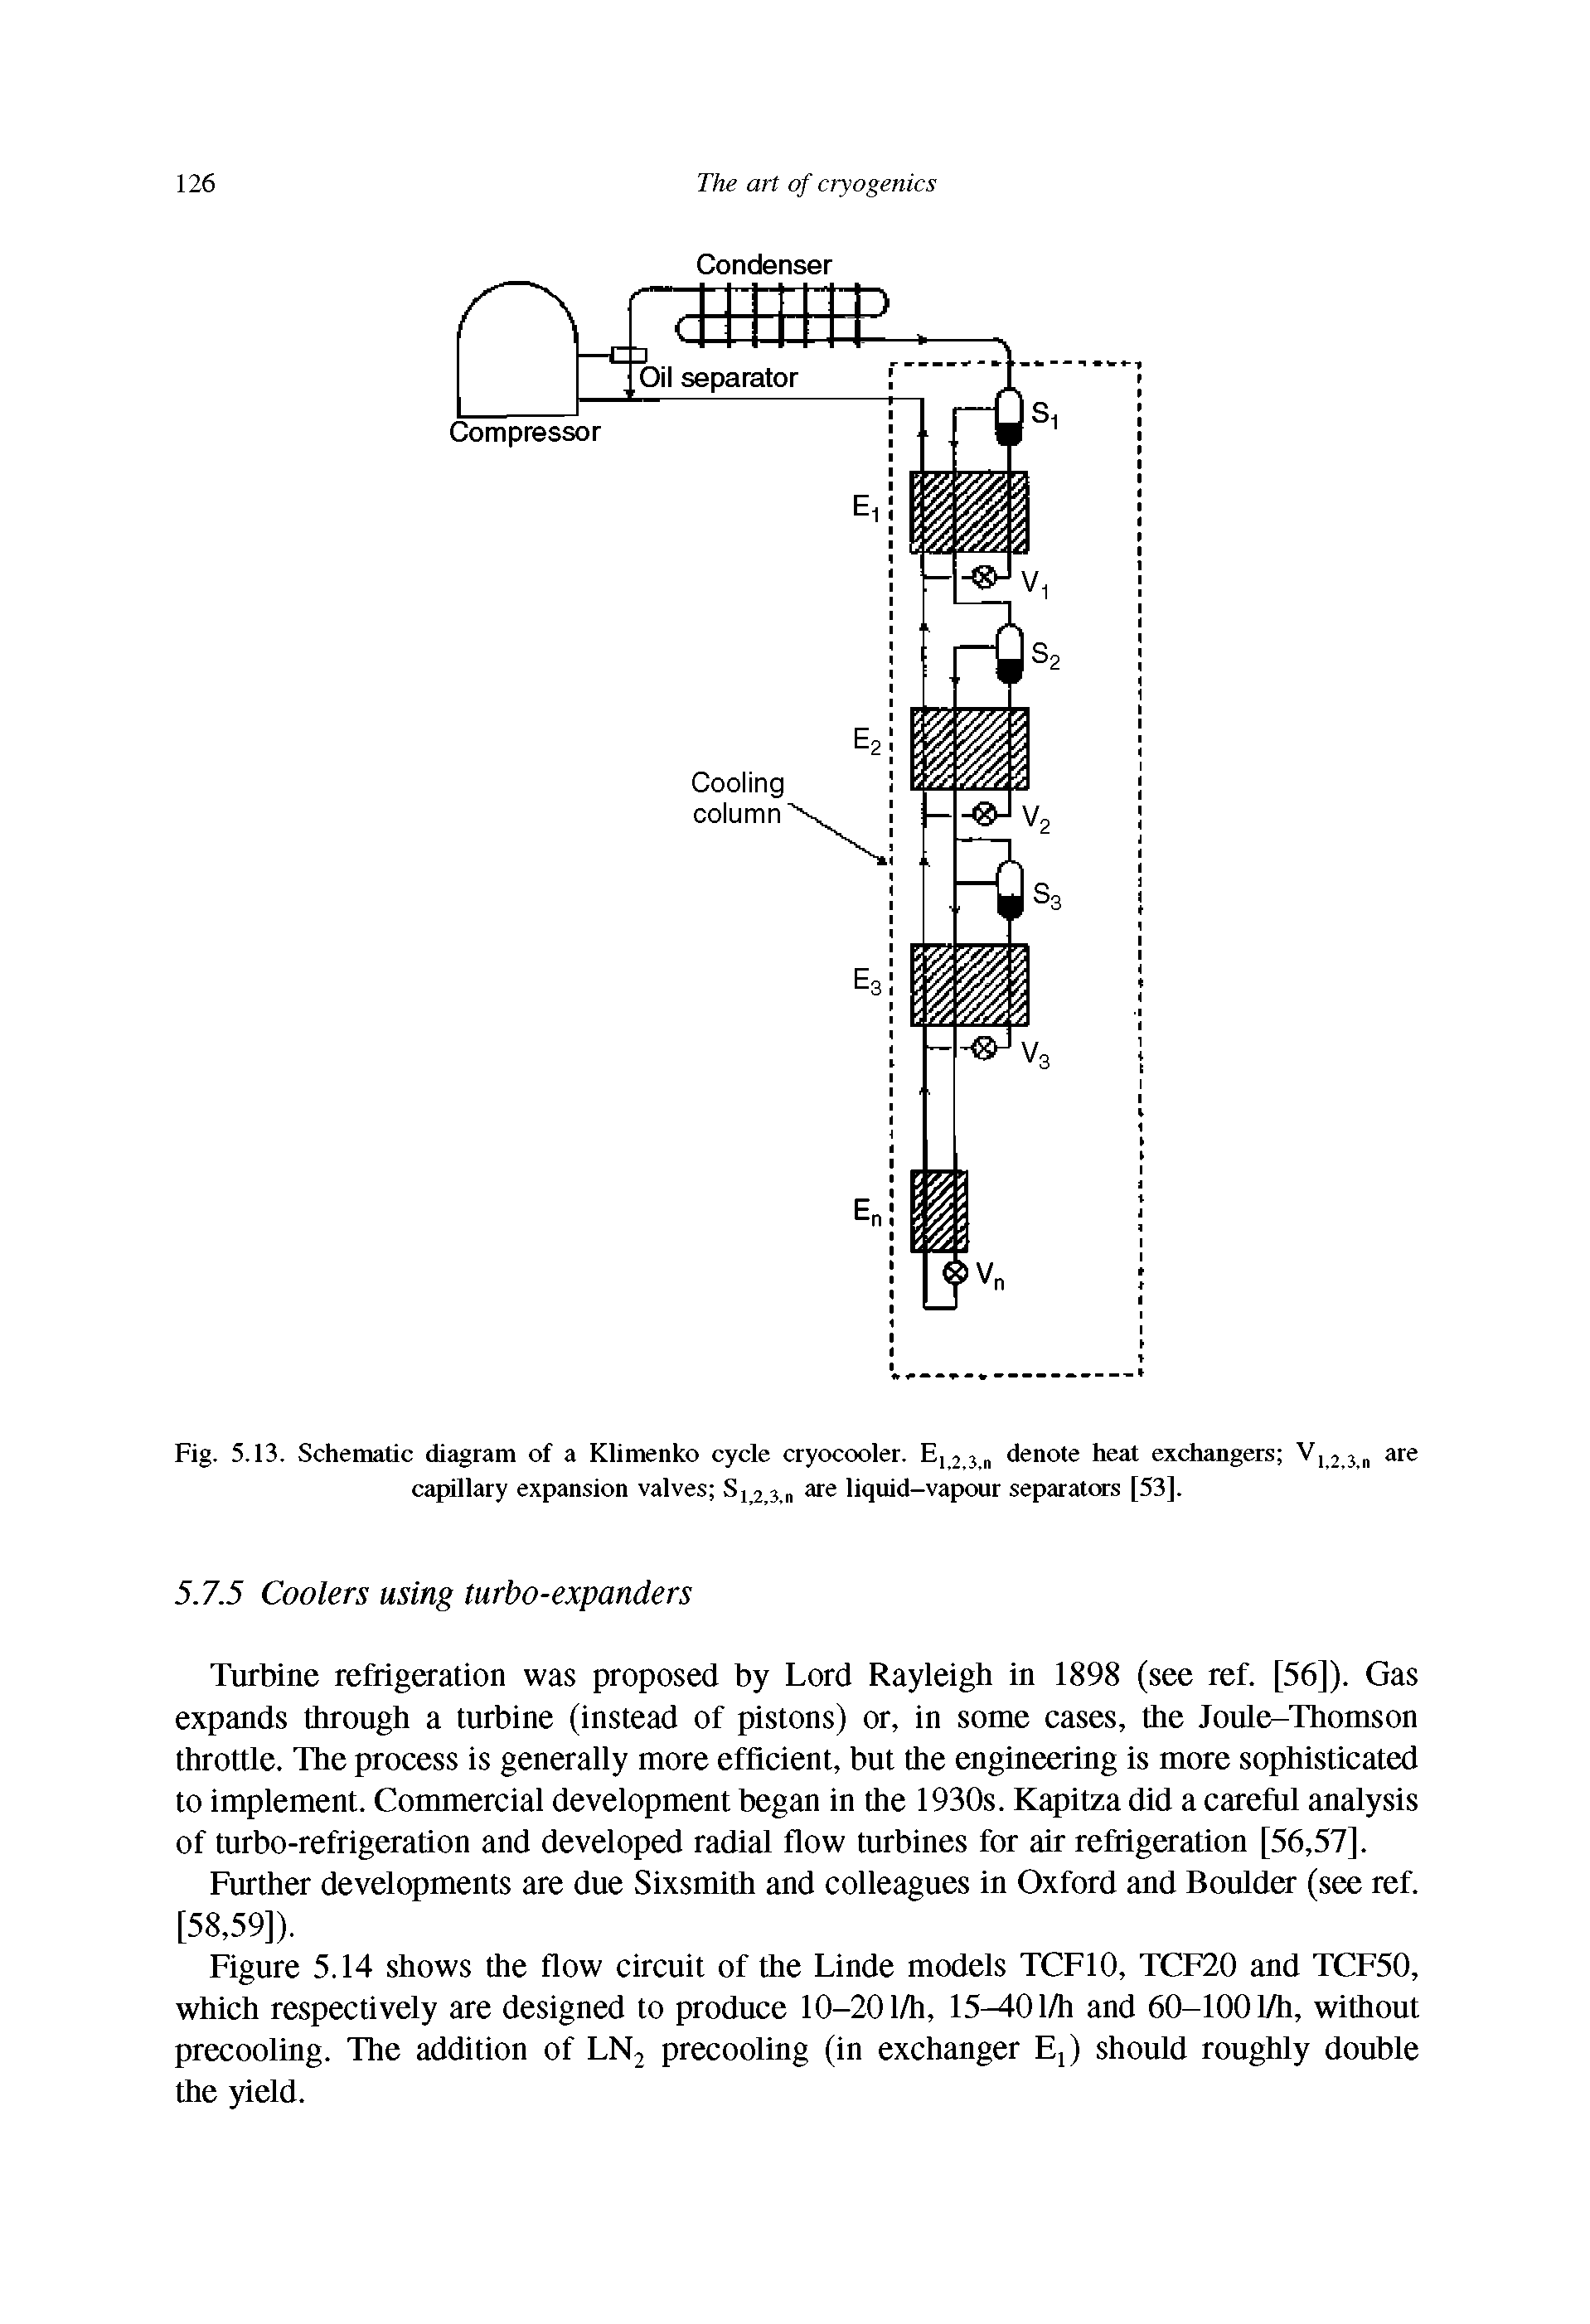 Fig. 5.13. Schematic diagram of a Klimenko cycle cryocooler. E123 denote heat exchangers V12 3 n are capillary expansion valves S12 3in are liquid-vapour separators [53].